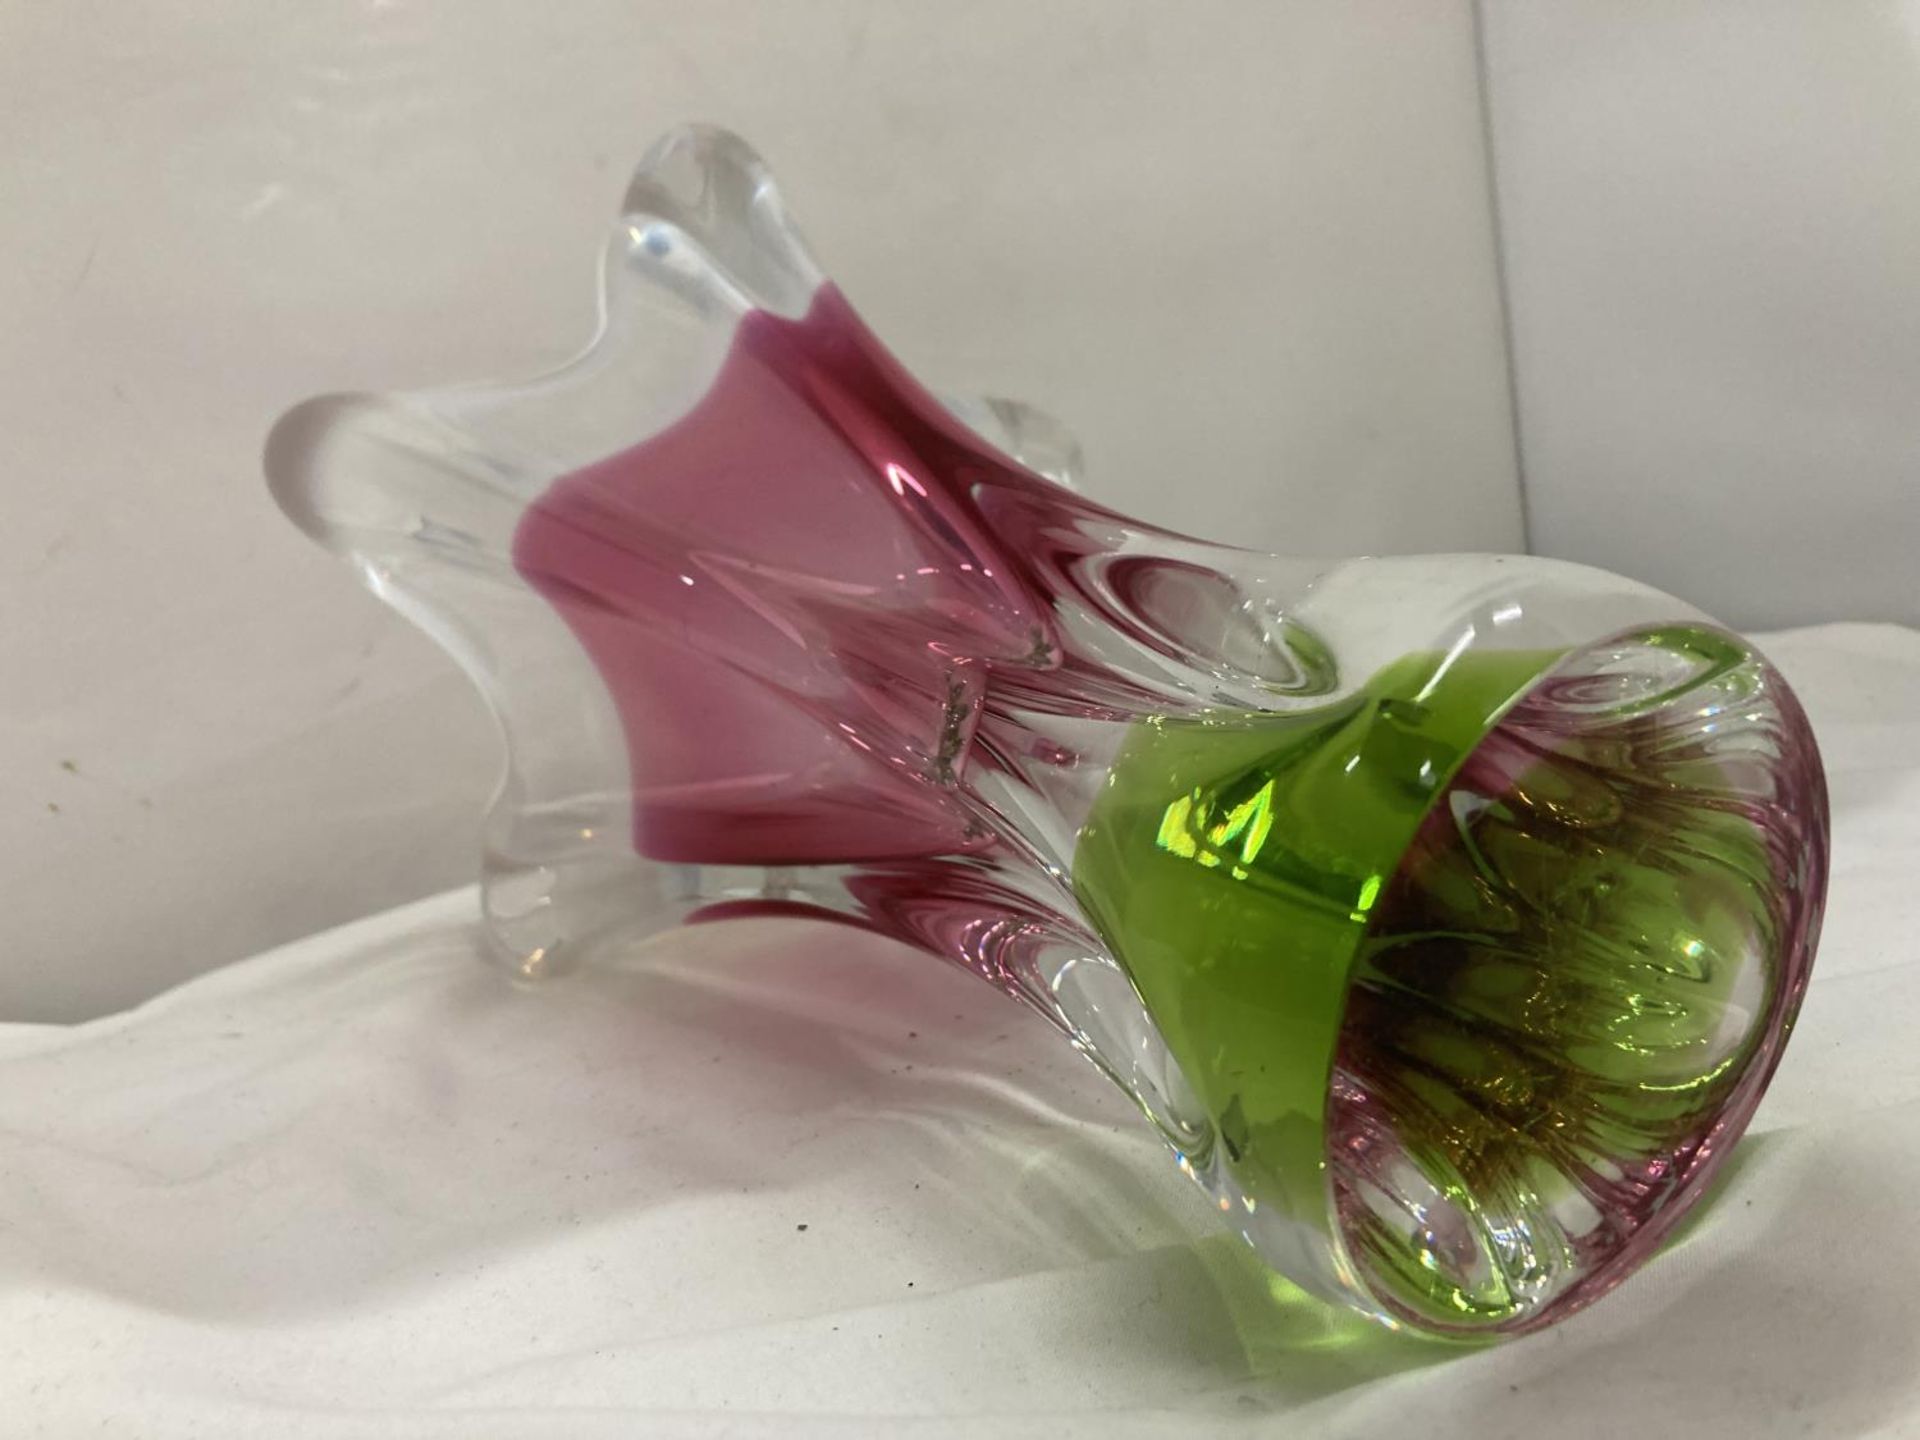 A MURANO STYLE HEAVY ART GLASS VASE WITH GRADUATING COLOURS OF GREEN, CRANBERRY AND ACID WHITE - - Image 17 of 17